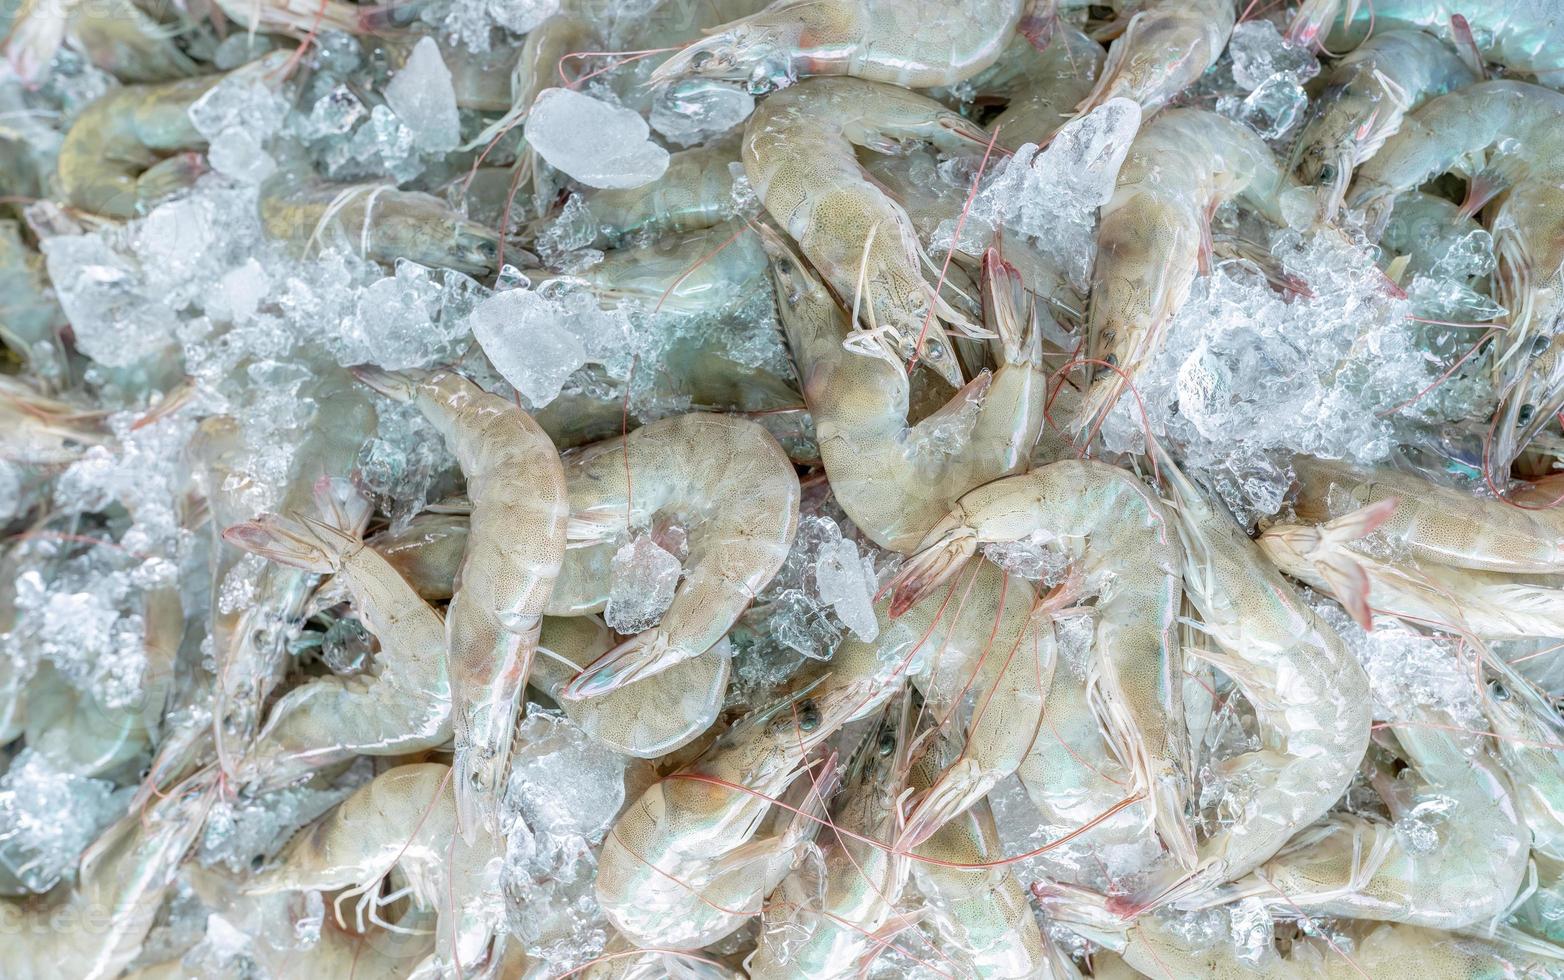 Fresh white shrimps on crushed ice for sale in market. Raw prawns for cooking in seafood restaurant. Sea food industry. Shellfish animal. Shrimp market. Uncooked prawn. Shrimp for frozen food factory. photo